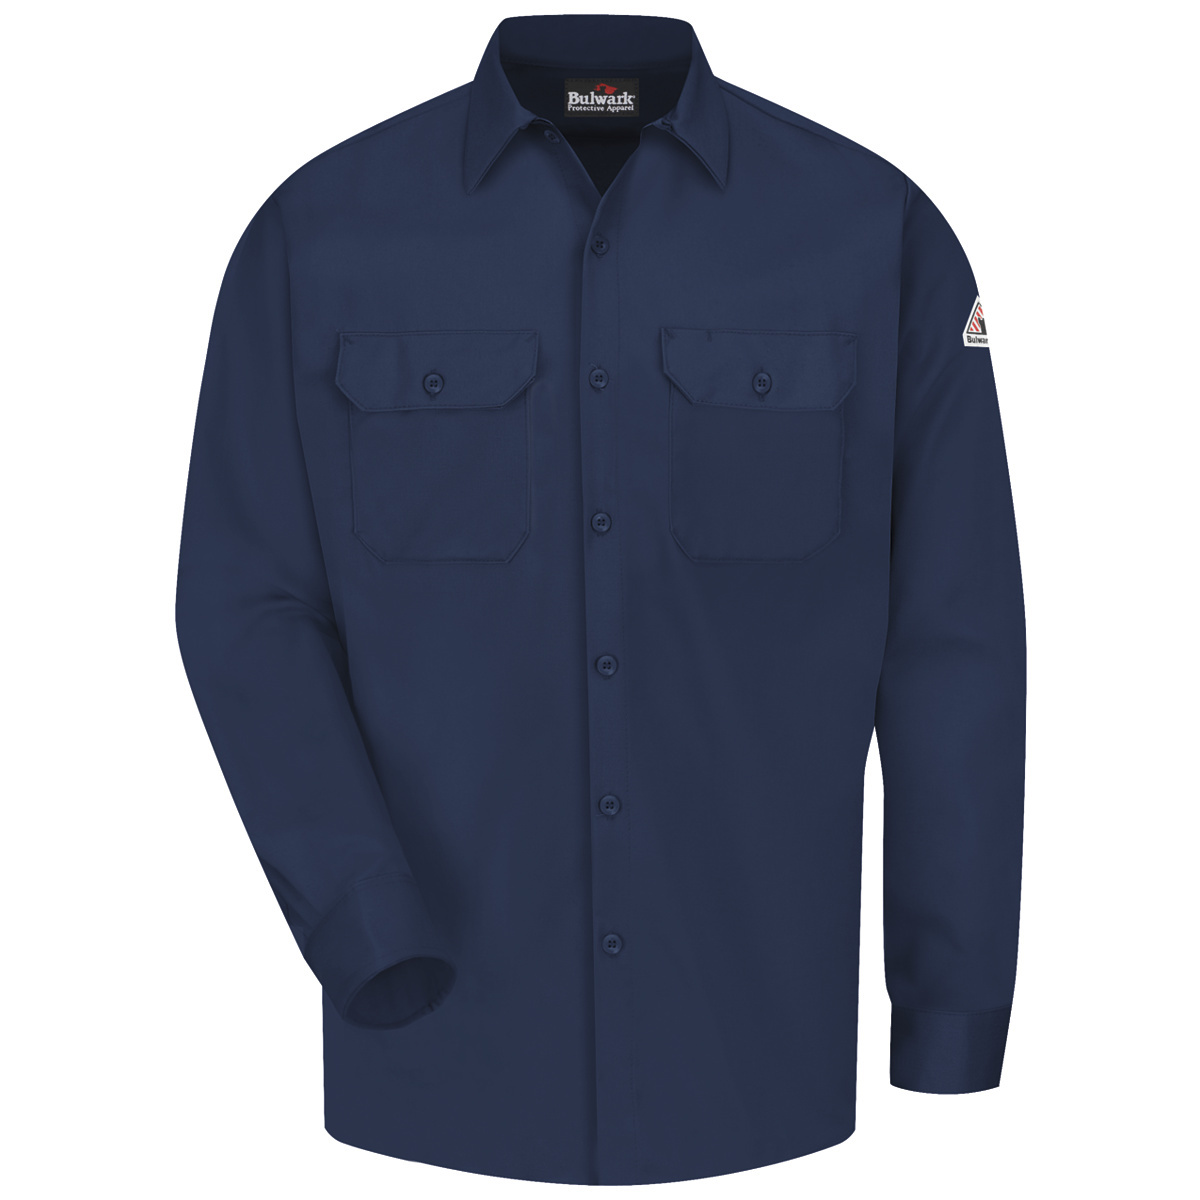 Bulwark® Large Tall Navy Blue Westex Ultrasoft®/Cotton/Nylon Flame Resistant Work Shirt With Button Front Closure